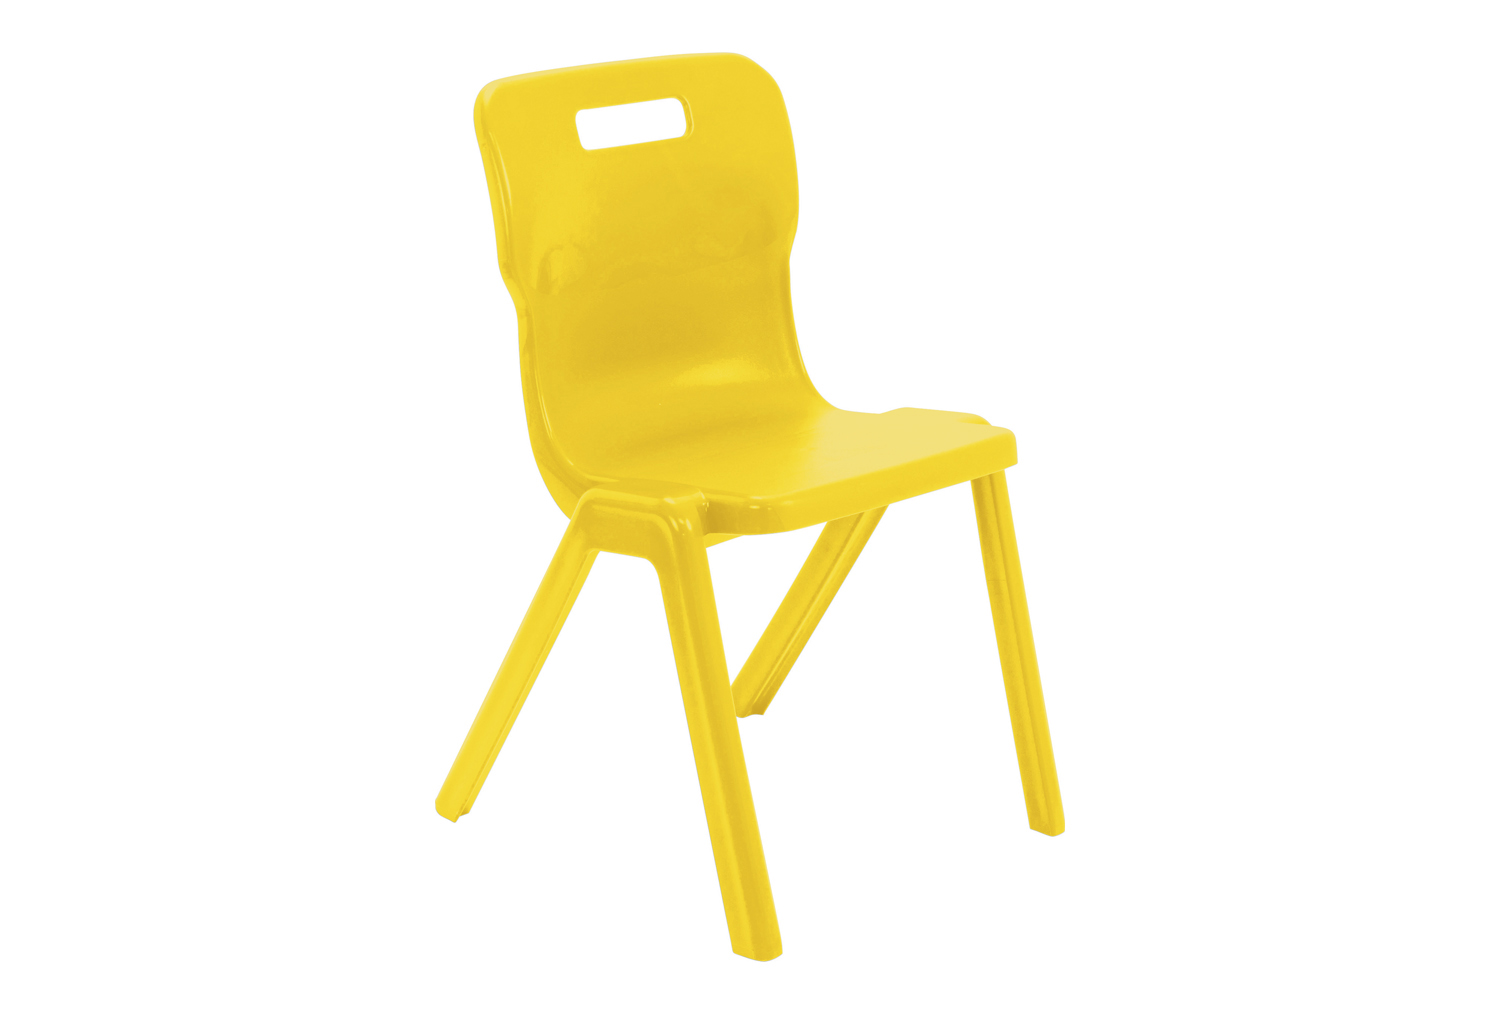 Titan One Piece Classroom Chair, 8- 9 Years - 34wx33dx38h (cm), Yellow